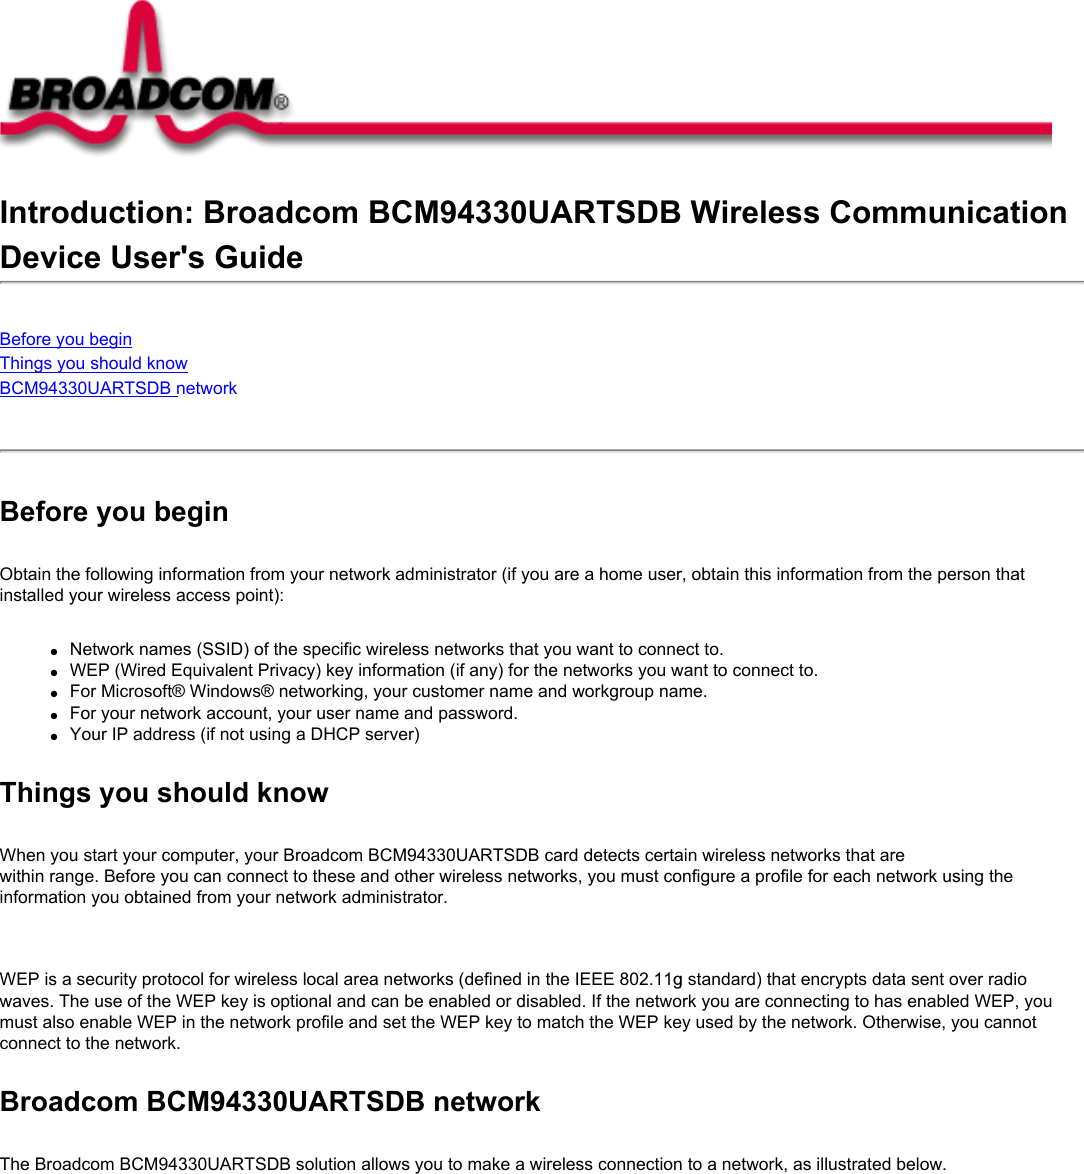 Introduction: Broadcom BCM94330UARTSDB Wireless CommunicationDevice User&apos;s GuideBefore you beginThings you should knowBCM94330UARTSDB network Before you beginObtain the following information from your network administrator (if you are a home user, obtain this information from the person that installed your wireless access point):●     Network names (SSID) of the specific wireless networks that you want to connect to.●     WEP (Wired Equivalent Privacy) key information (if any) for the networks you want to connect to.●     For Microsoft® Windows® networking, your customer name and workgroup name.●     For your network account, your user name and password.●     Your IP address (if not using a DHCP server)Things you should knowWhen you start your computer, your Broadcom BCM94330UARTSDB card detects certain wireless networks that are within range. Before you can connect to these and other wireless networks, you must configure a profile for each network using the information you obtained from your network administrator.   WEP is a security protocol for wireless local area networks (defined in the IEEE 802.11g standard) that encrypts data sent over radio waves. The use of the WEP key is optional and can be enabled or disabled. If the network you are connecting to has enabled WEP, you must also enable WEP in the network profile and set the WEP key to match the WEP key used by the network. Otherwise, you cannot connect to the network.Broadcom BCM94330UARTSDB networkThe Broadcom BCM94330UARTSDB solution allows you to make a wireless connection to a network, as illustrated below.